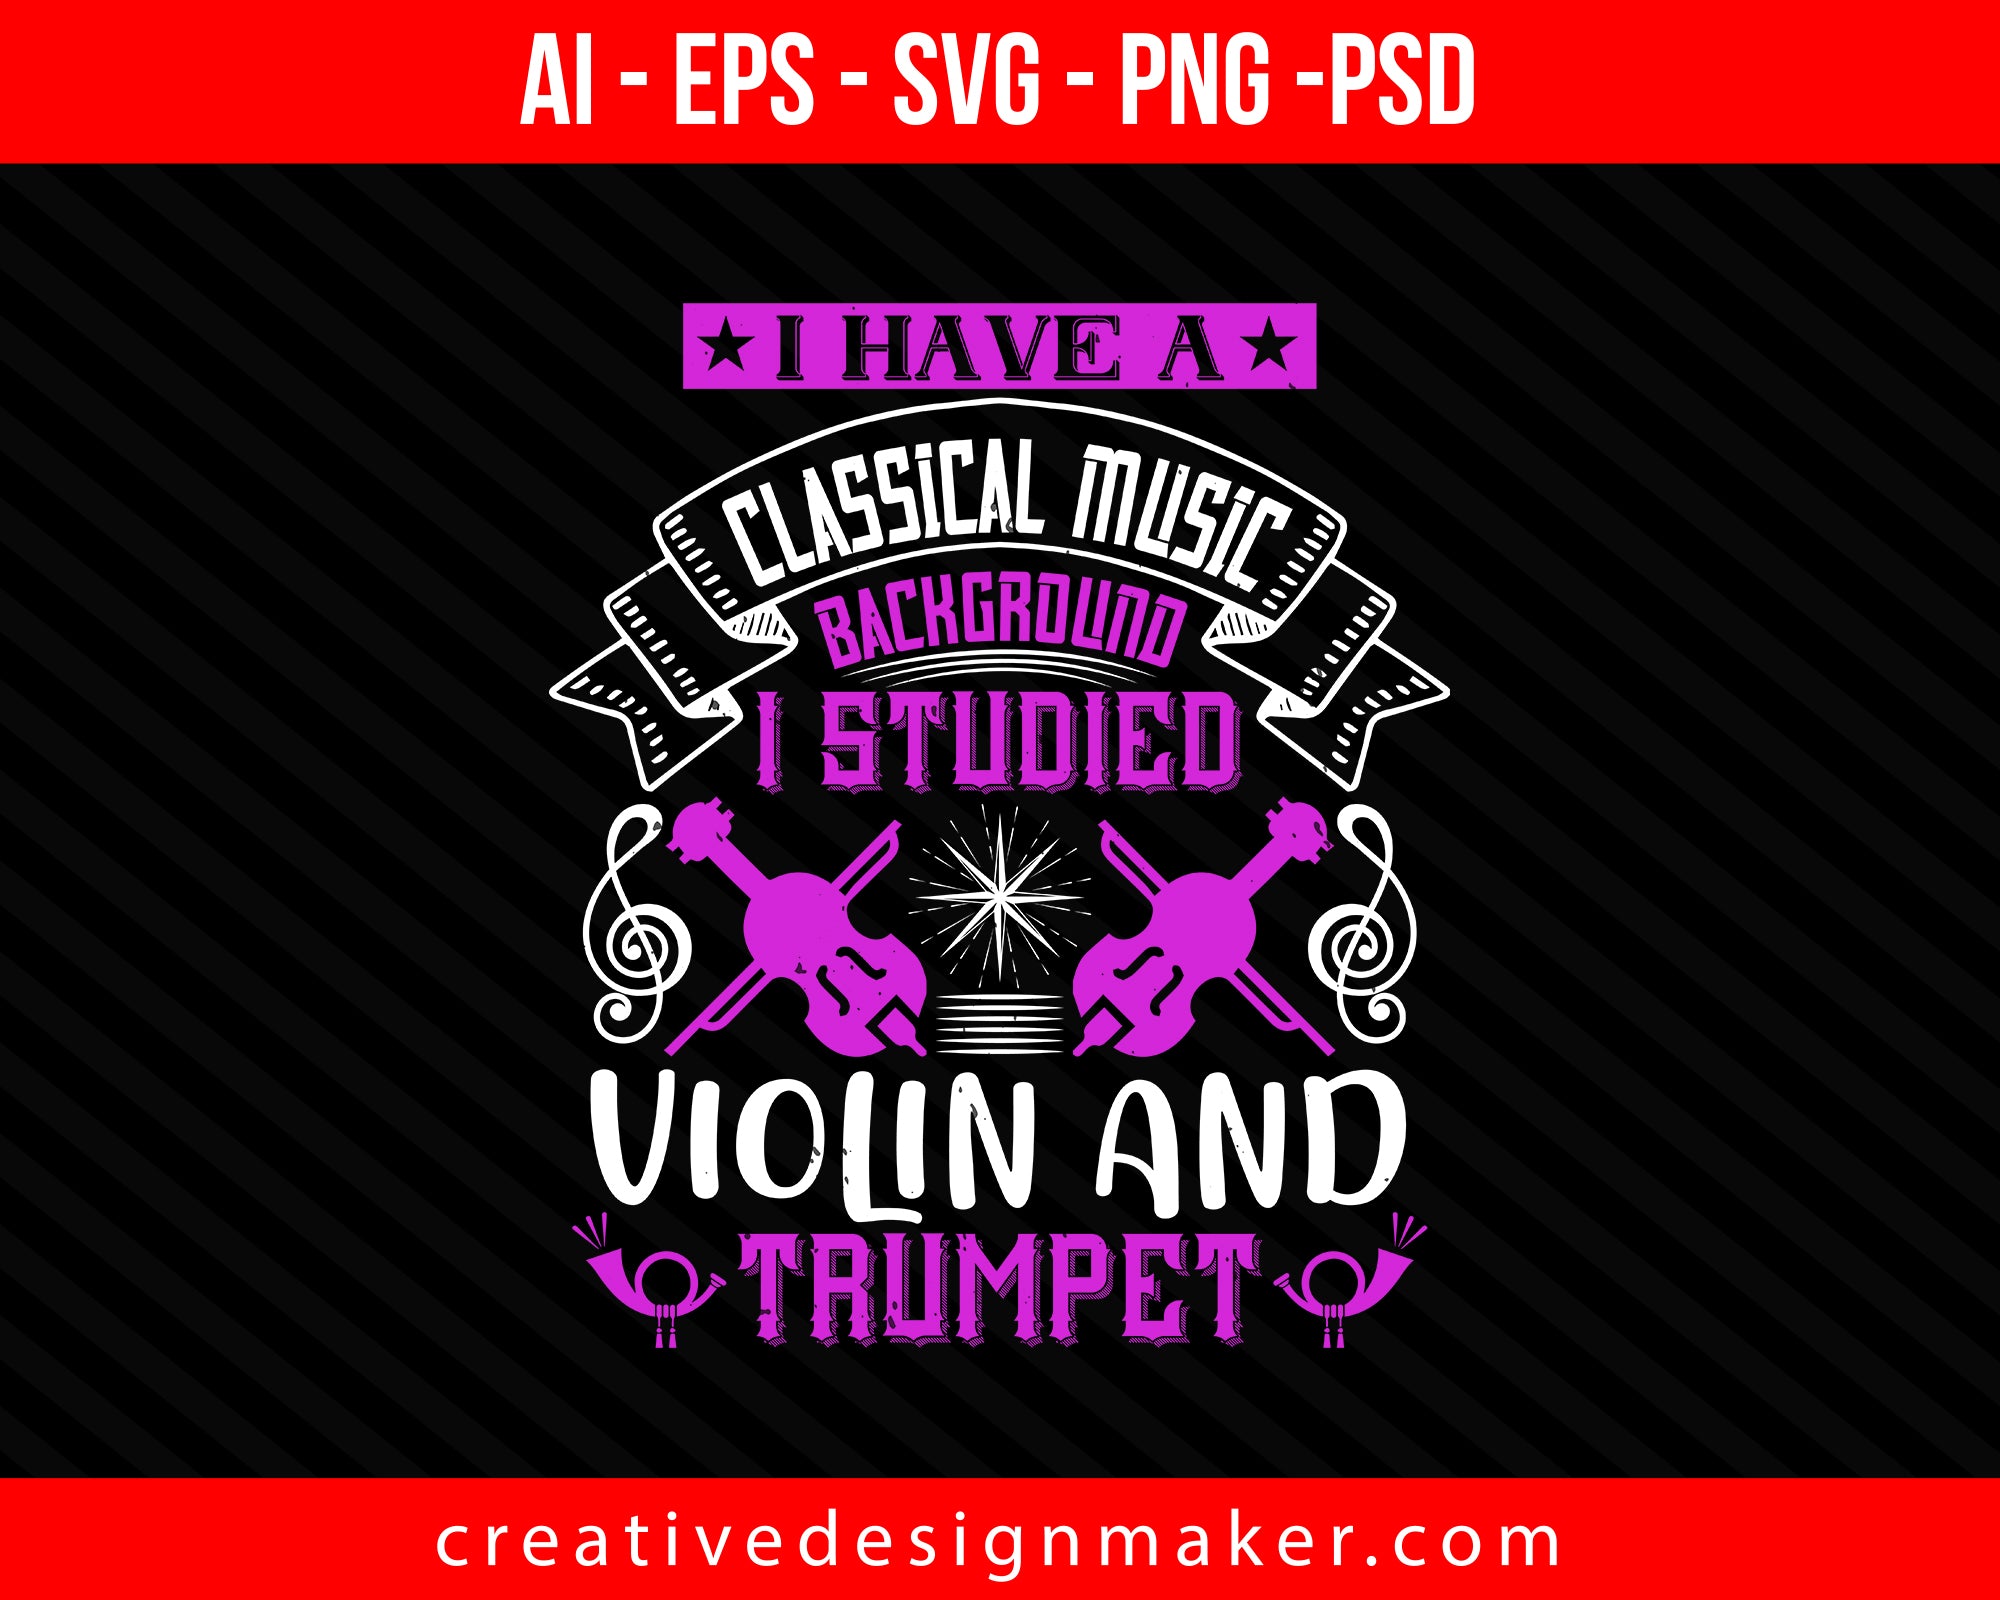 I have a classical music background, i studied violin and trumpet Print Ready Editable T-Shirt SVG Design!